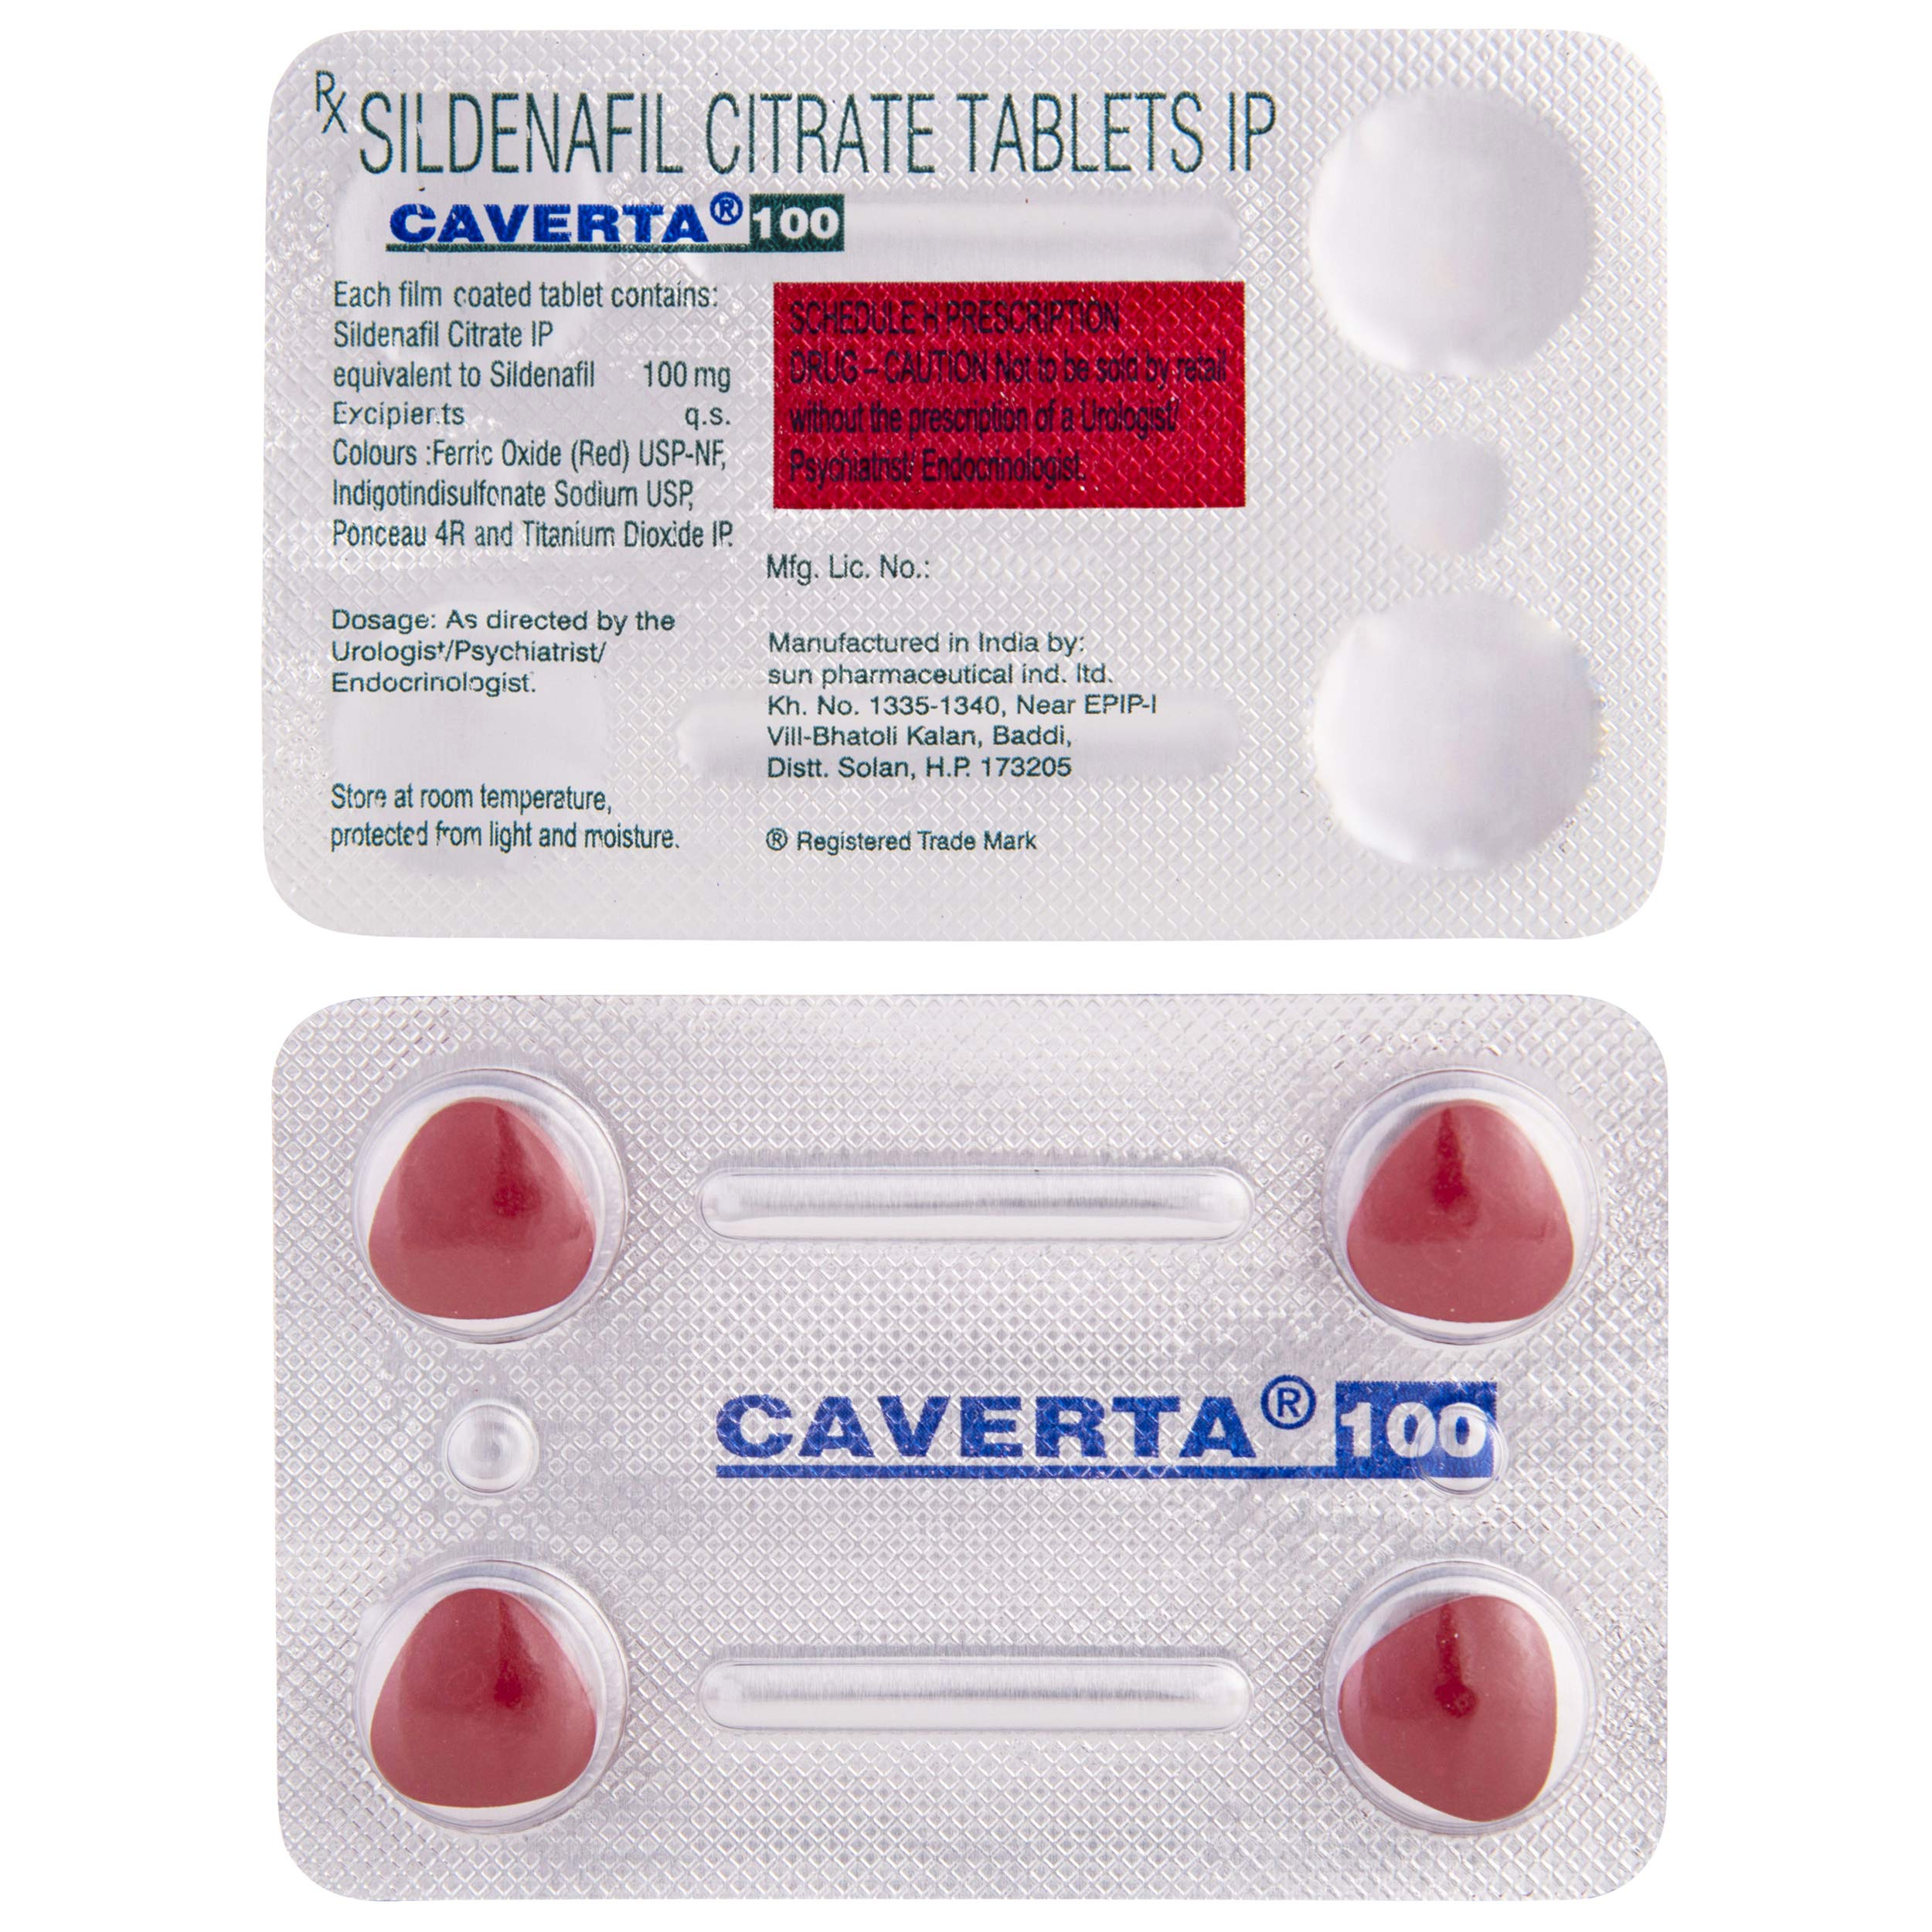 X SILDENAFIL CITRATE TABLETS IP
CAVERTA®TT] |

Each film coated tablet contains:
Sildenafil Citrate IP

equivalent to Sildenafil 100mg
Excipierts q.s.
Colours :Ferric Oxide (Red) USP-NF,
Indigotindisulfonate Sodium USP
Ponceau 4R and Titanium Dioxide IP

 

Mfg. Lic. No.:

Dosage: As directed by the ) 4
Urologis*/Psychiatrist/ Manufactured in India by:
Endocrinologist. sun pharmaceutical ind. itd.
Kh. No. 1335-1340, Near EPIP-|
Vill-Bhatoli Kalan, Baddi,
Distt. Solan, H.P. 173205
Stora at room temperature,

protected from light and moisture. ® Registered Trade Mark

 
 

{

 

So

CAVERTAC [IW

Se